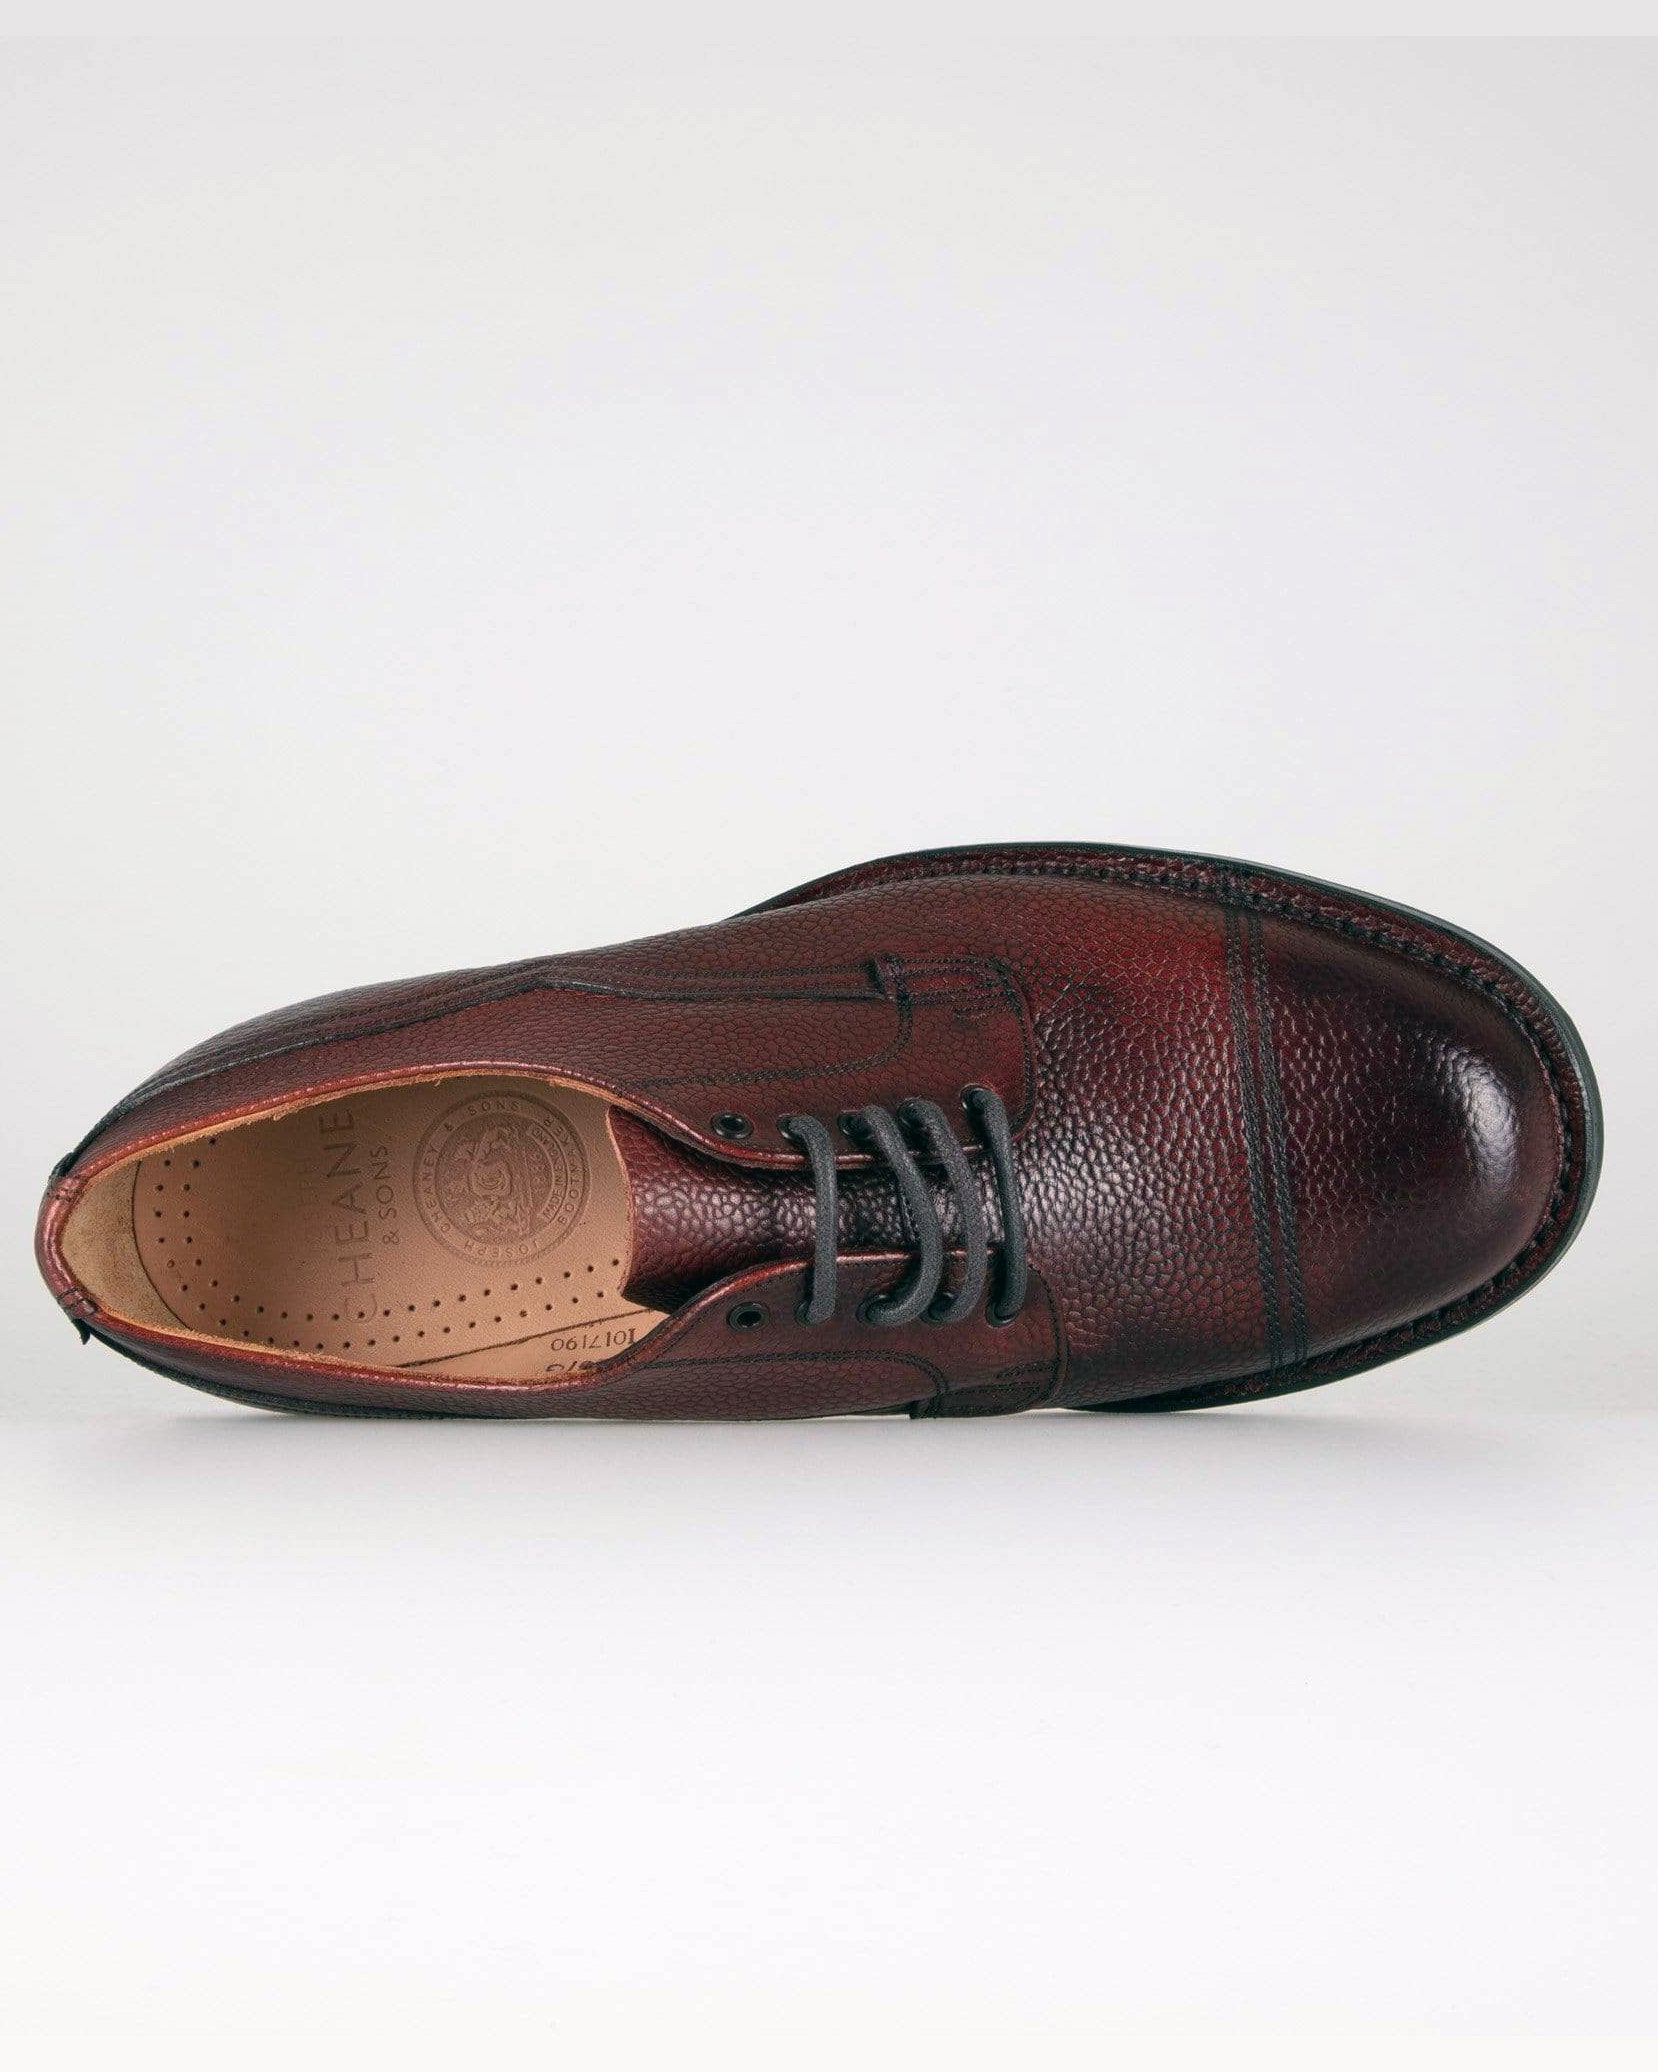 Cheaney Cairngorm II R Country Derby Shoe - Burgundy Grain Leather